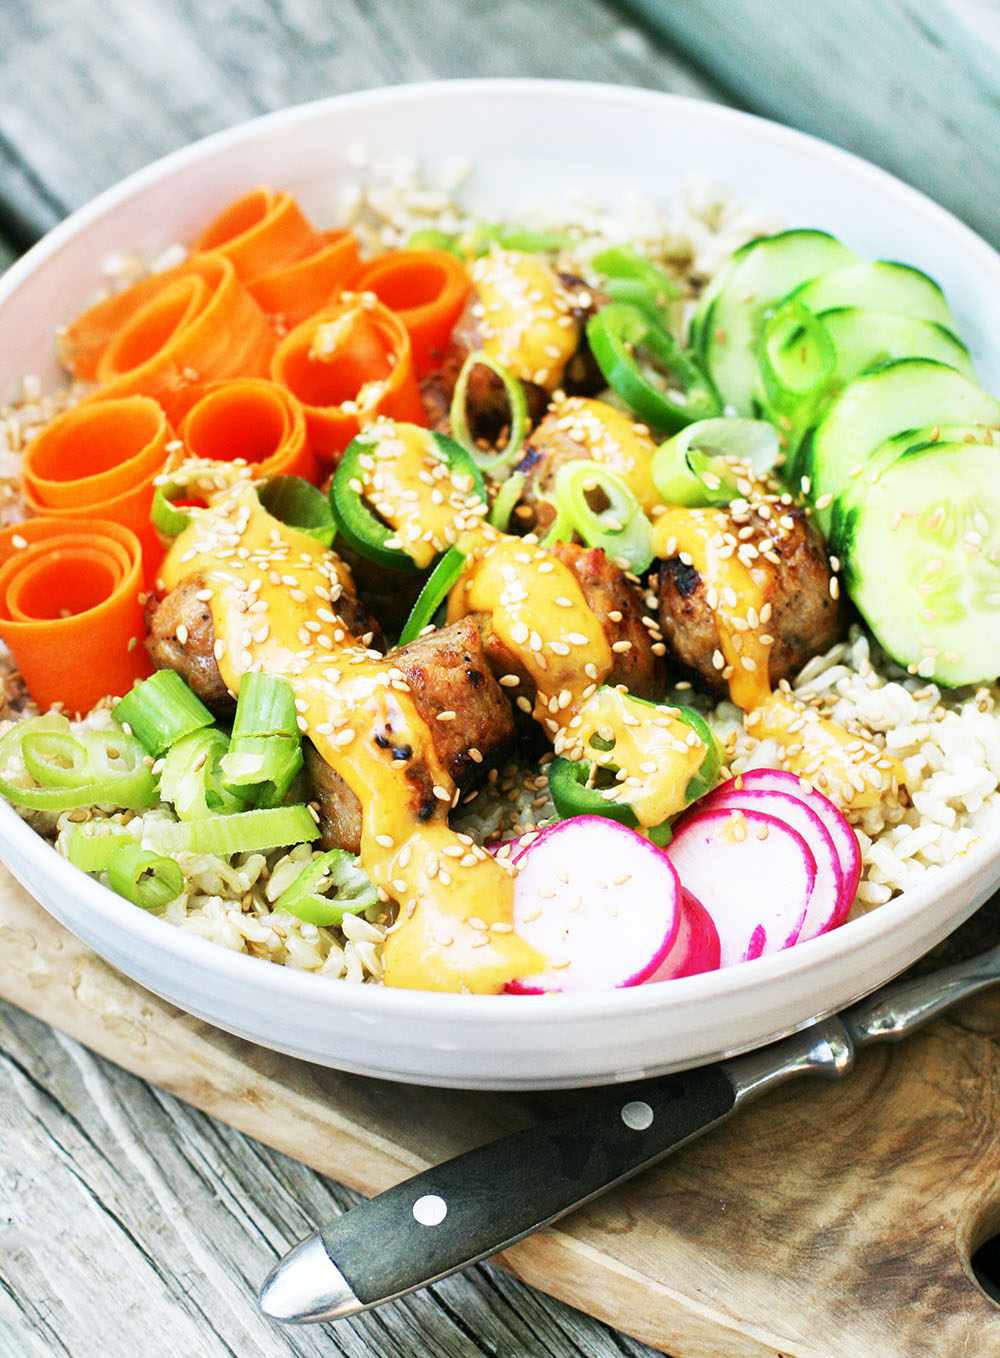 Chicken banh mi meatballs can be served in a variety of ways, including in a flavorful rice bowl.